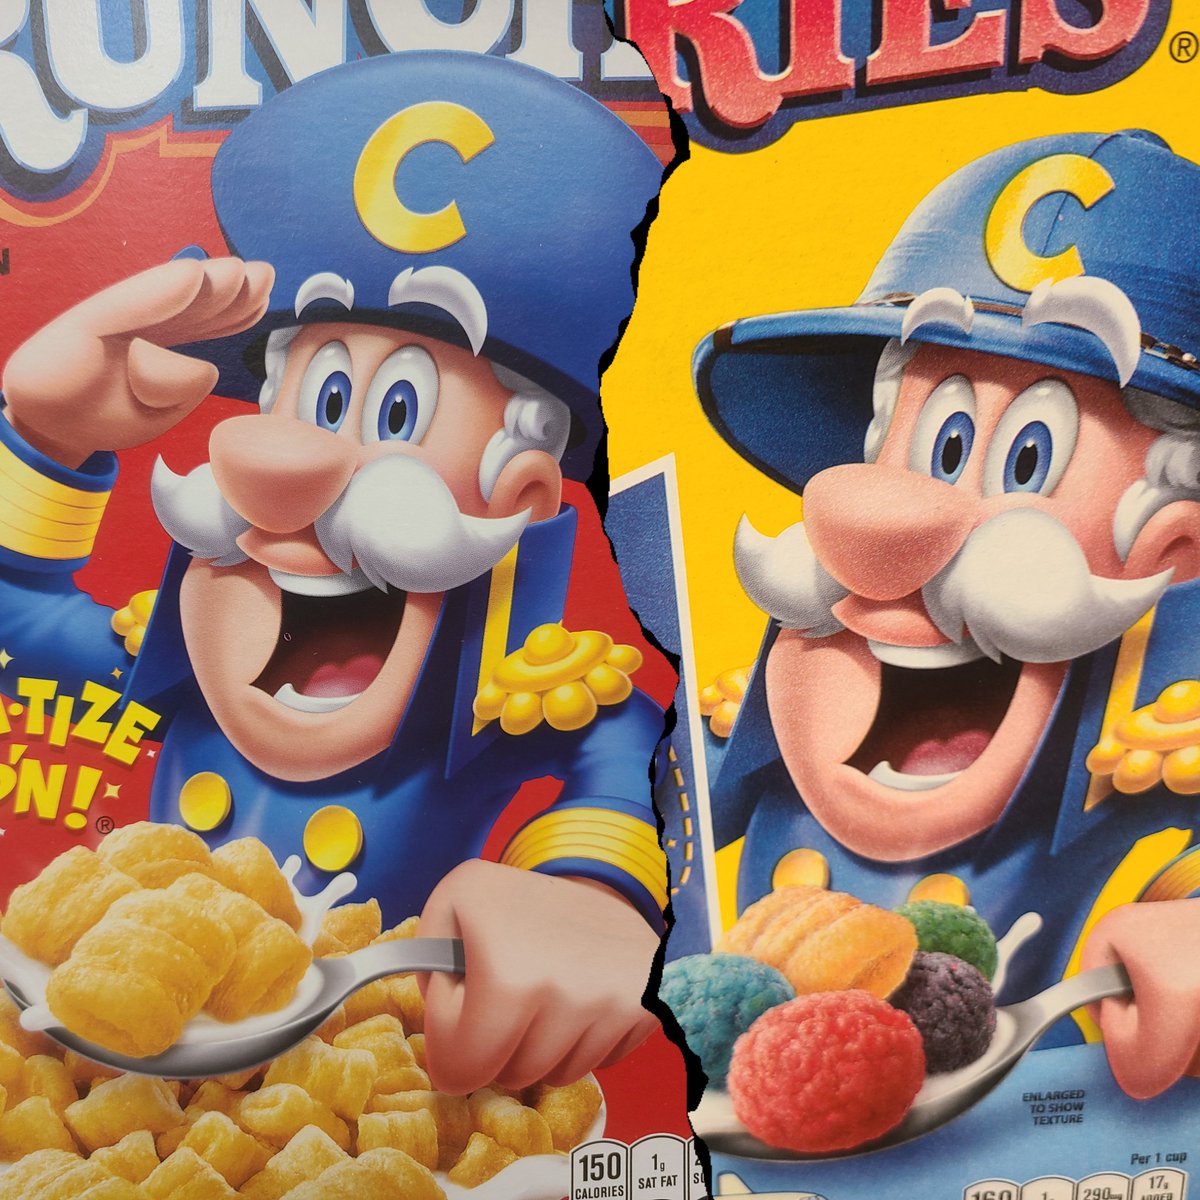 What unspeakable horror did the Cap'n see? What froze his face like that? Why can't he look away from the horizon?